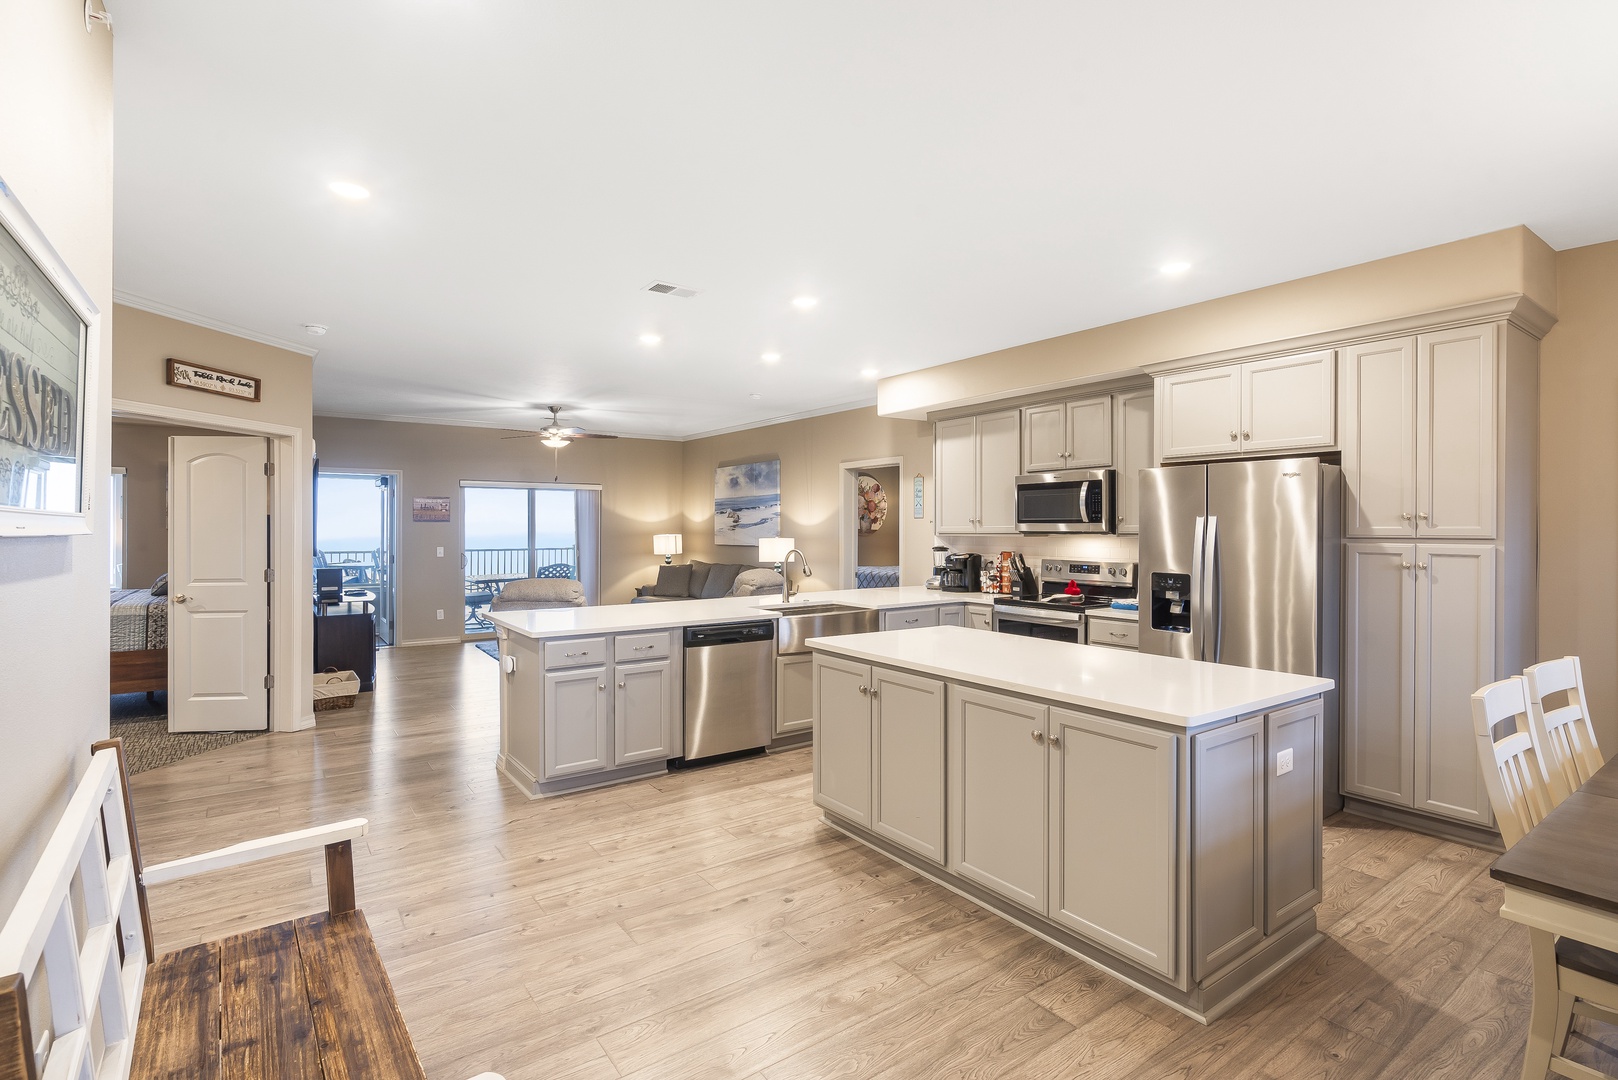 The airy kitchen is a chef's dream, with ample space & every home comfort